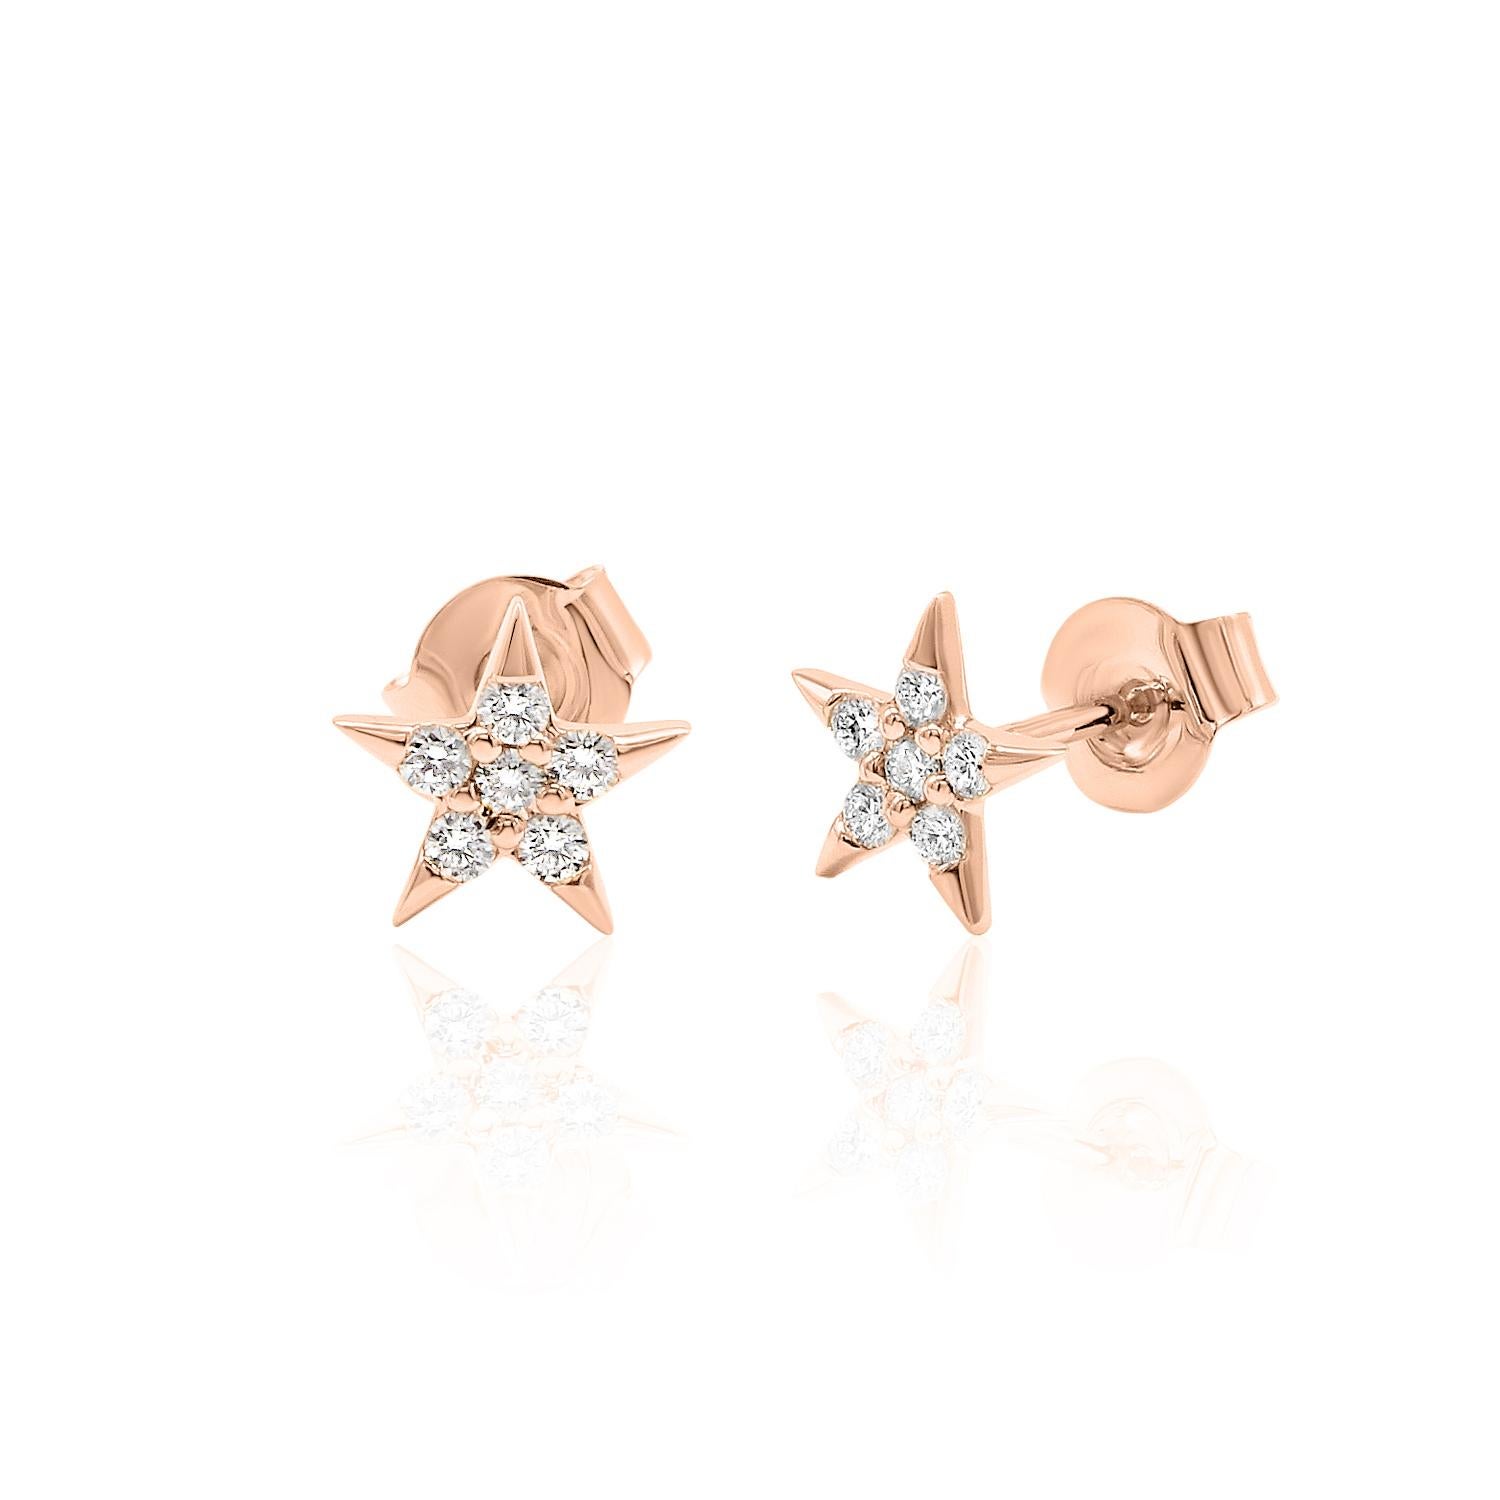 Round Cut Star Diamond Earrings 14K, White, Yellow, and Rose Gold